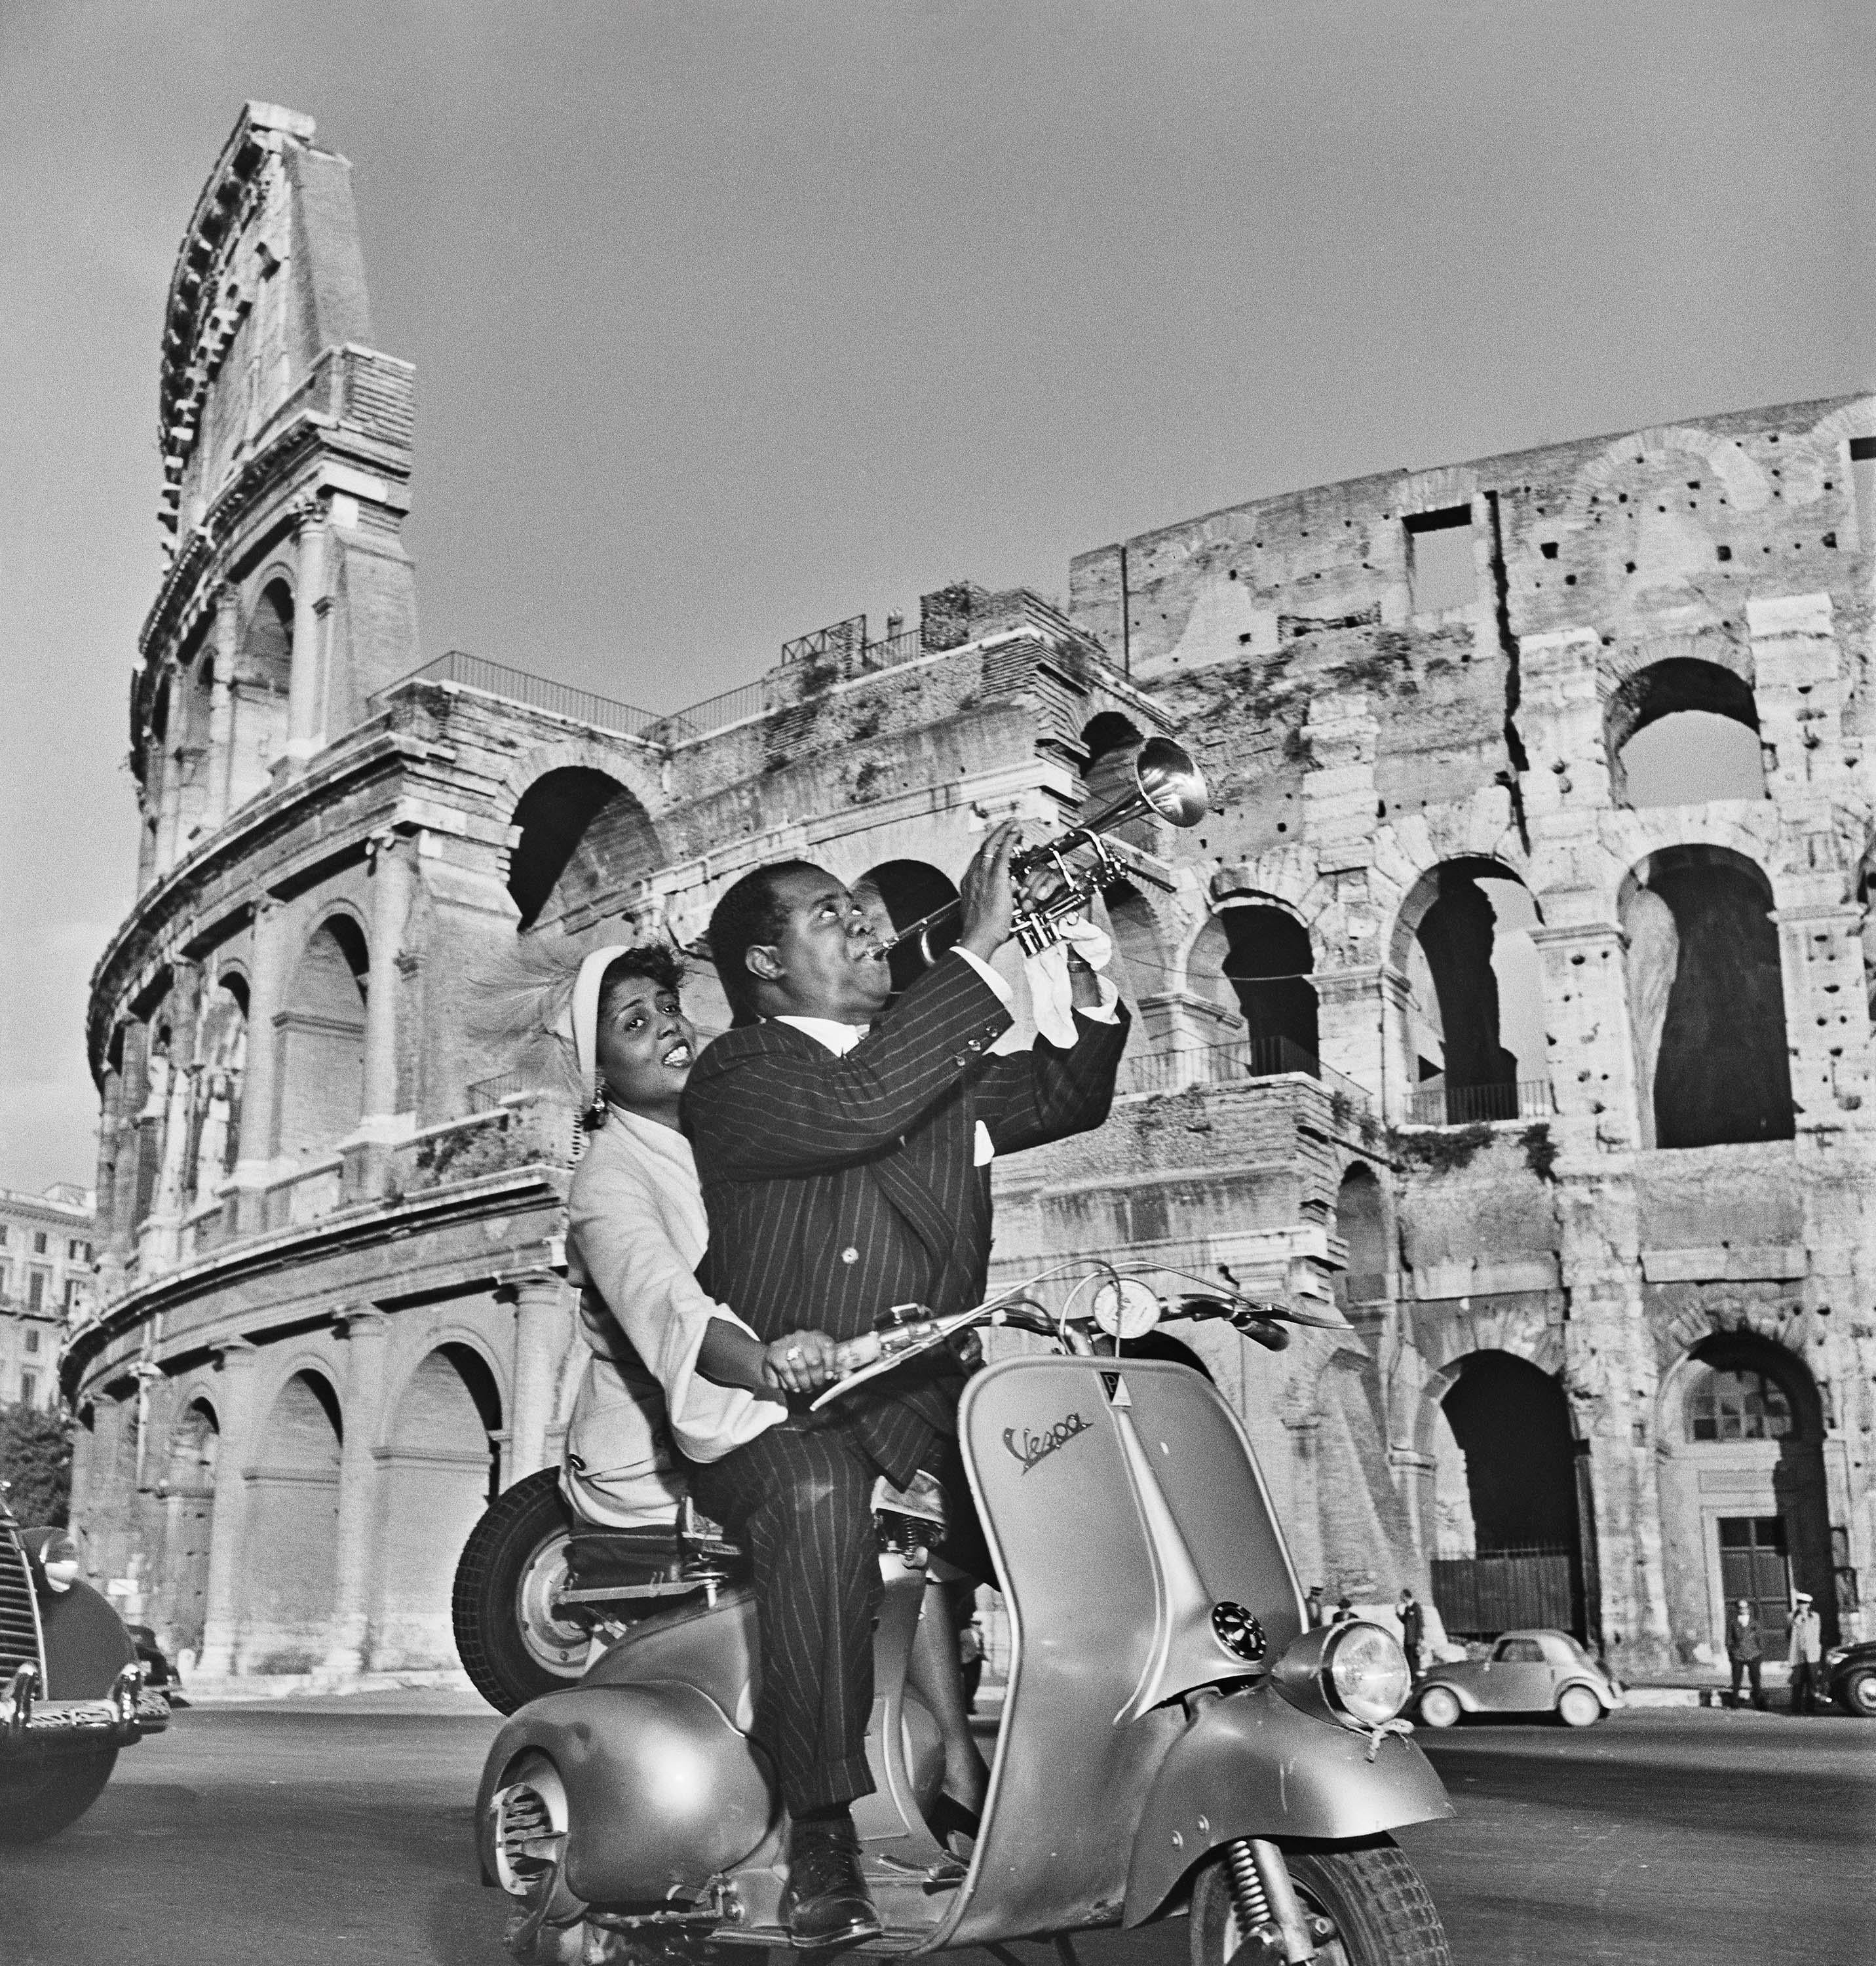 Slim Aarons Portrait Photograph - Jazz Scooter: Louis Armstrong and Lucille Brown in 1940s Rome, Estate Edition